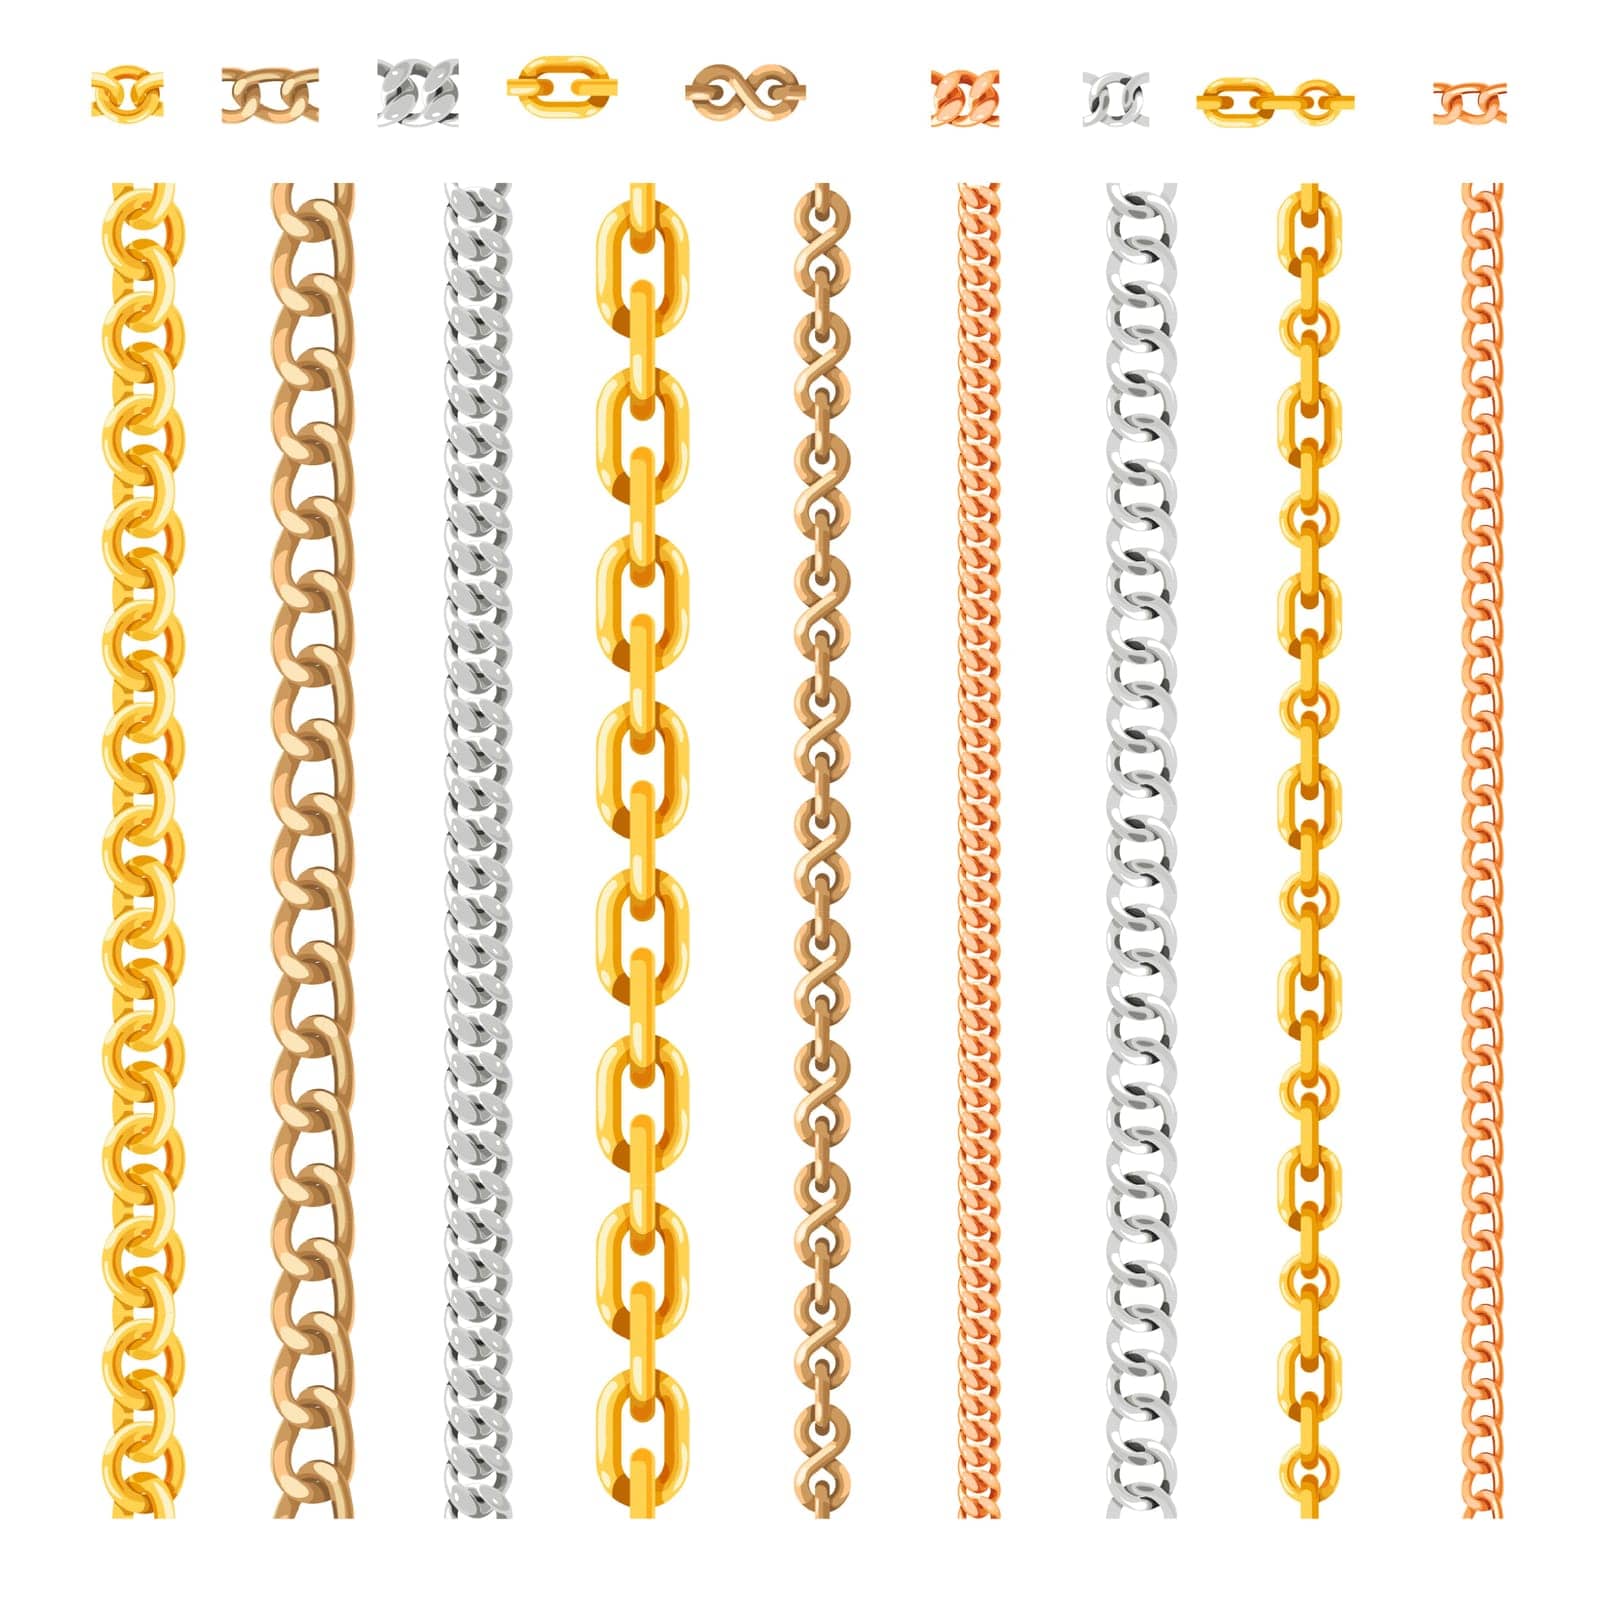 Luxury chains from base metals, fashion concept by Sonulkaster